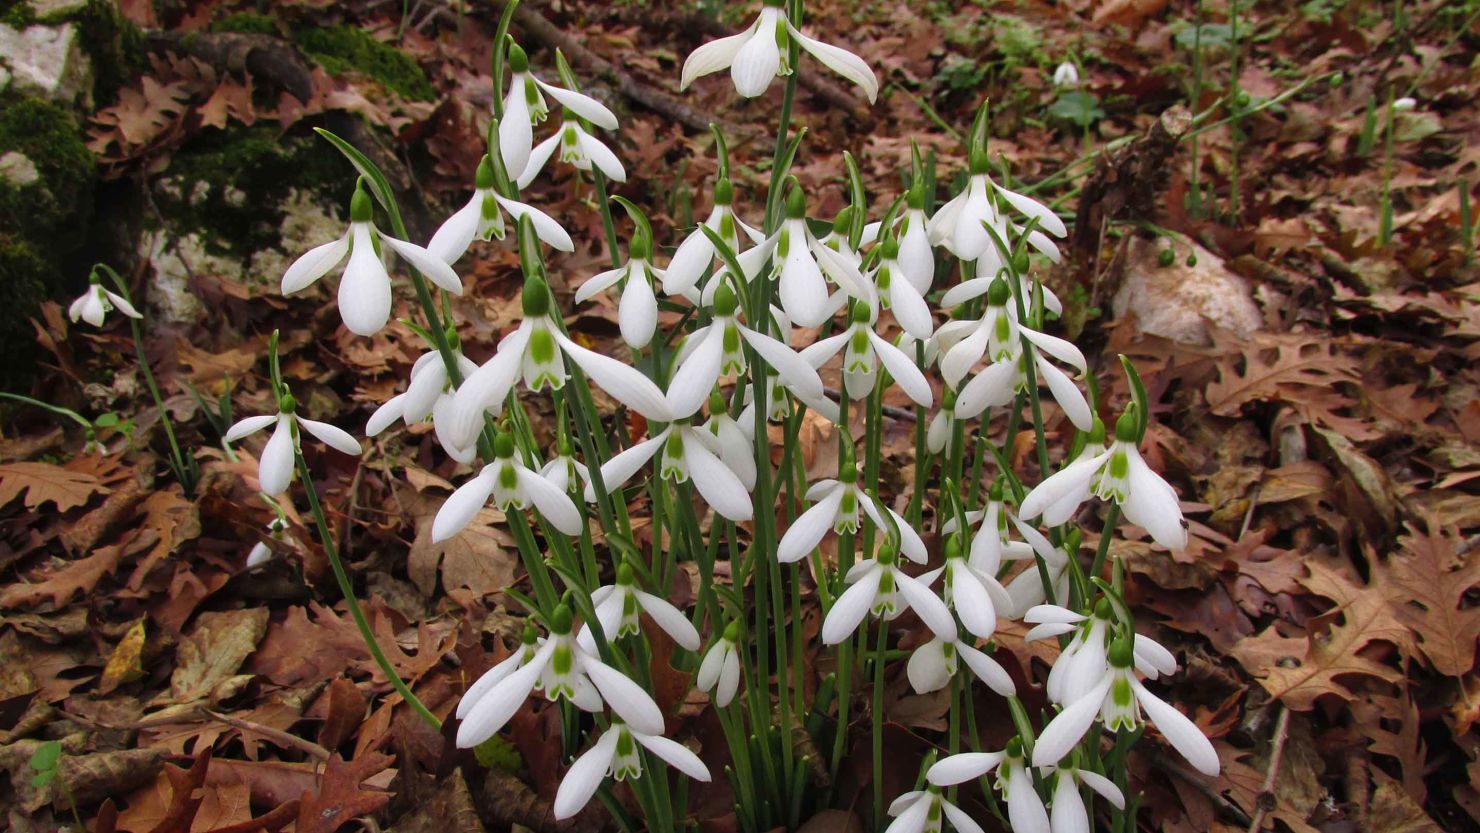 Galanthus bursanus was spotted on Facebook by a snowdrop expert.